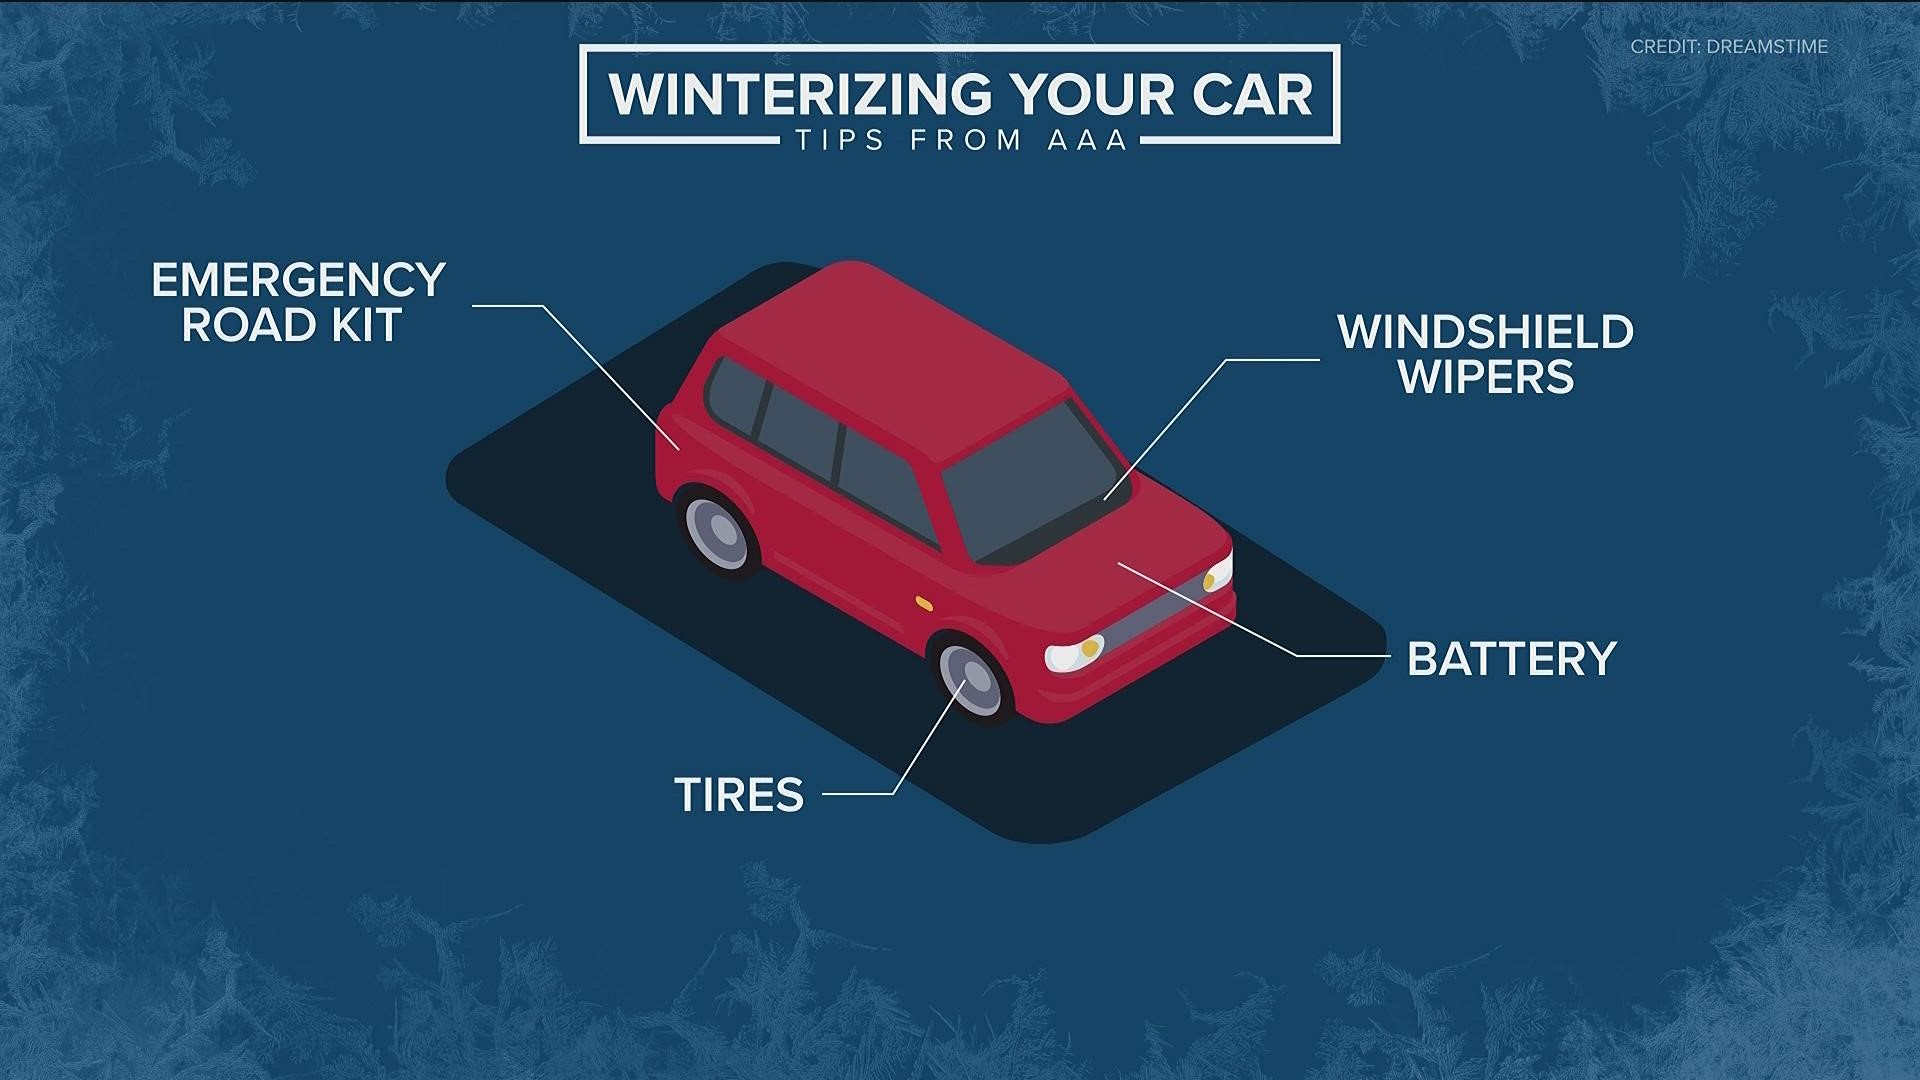 AAA offered these tips before heading out on the roads.